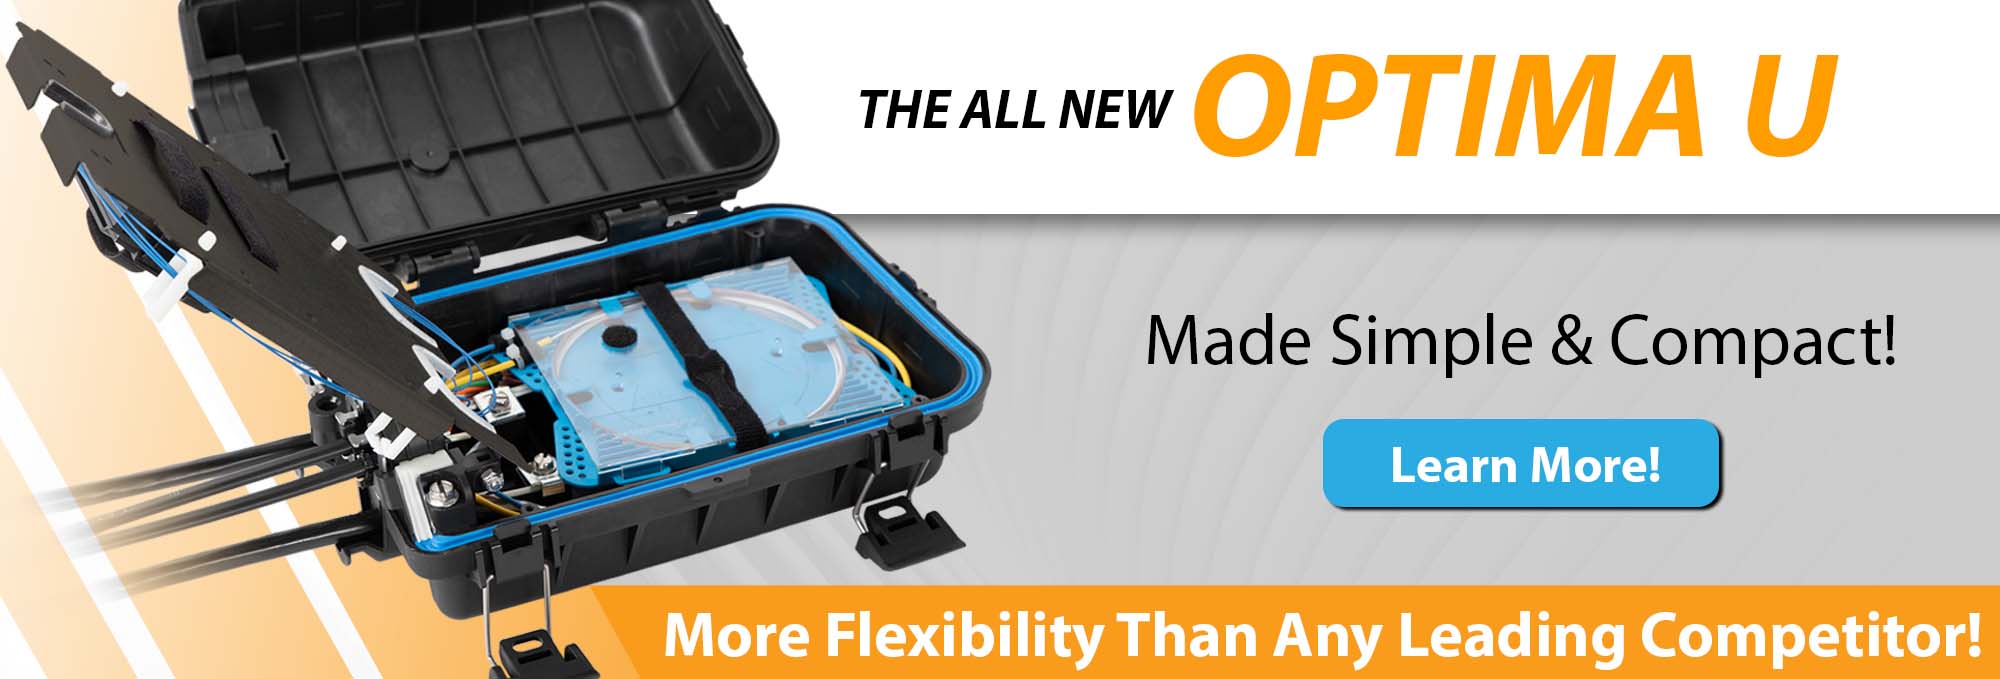 Multilink's new Optima U has 2 compartments to protect fiber optic cables